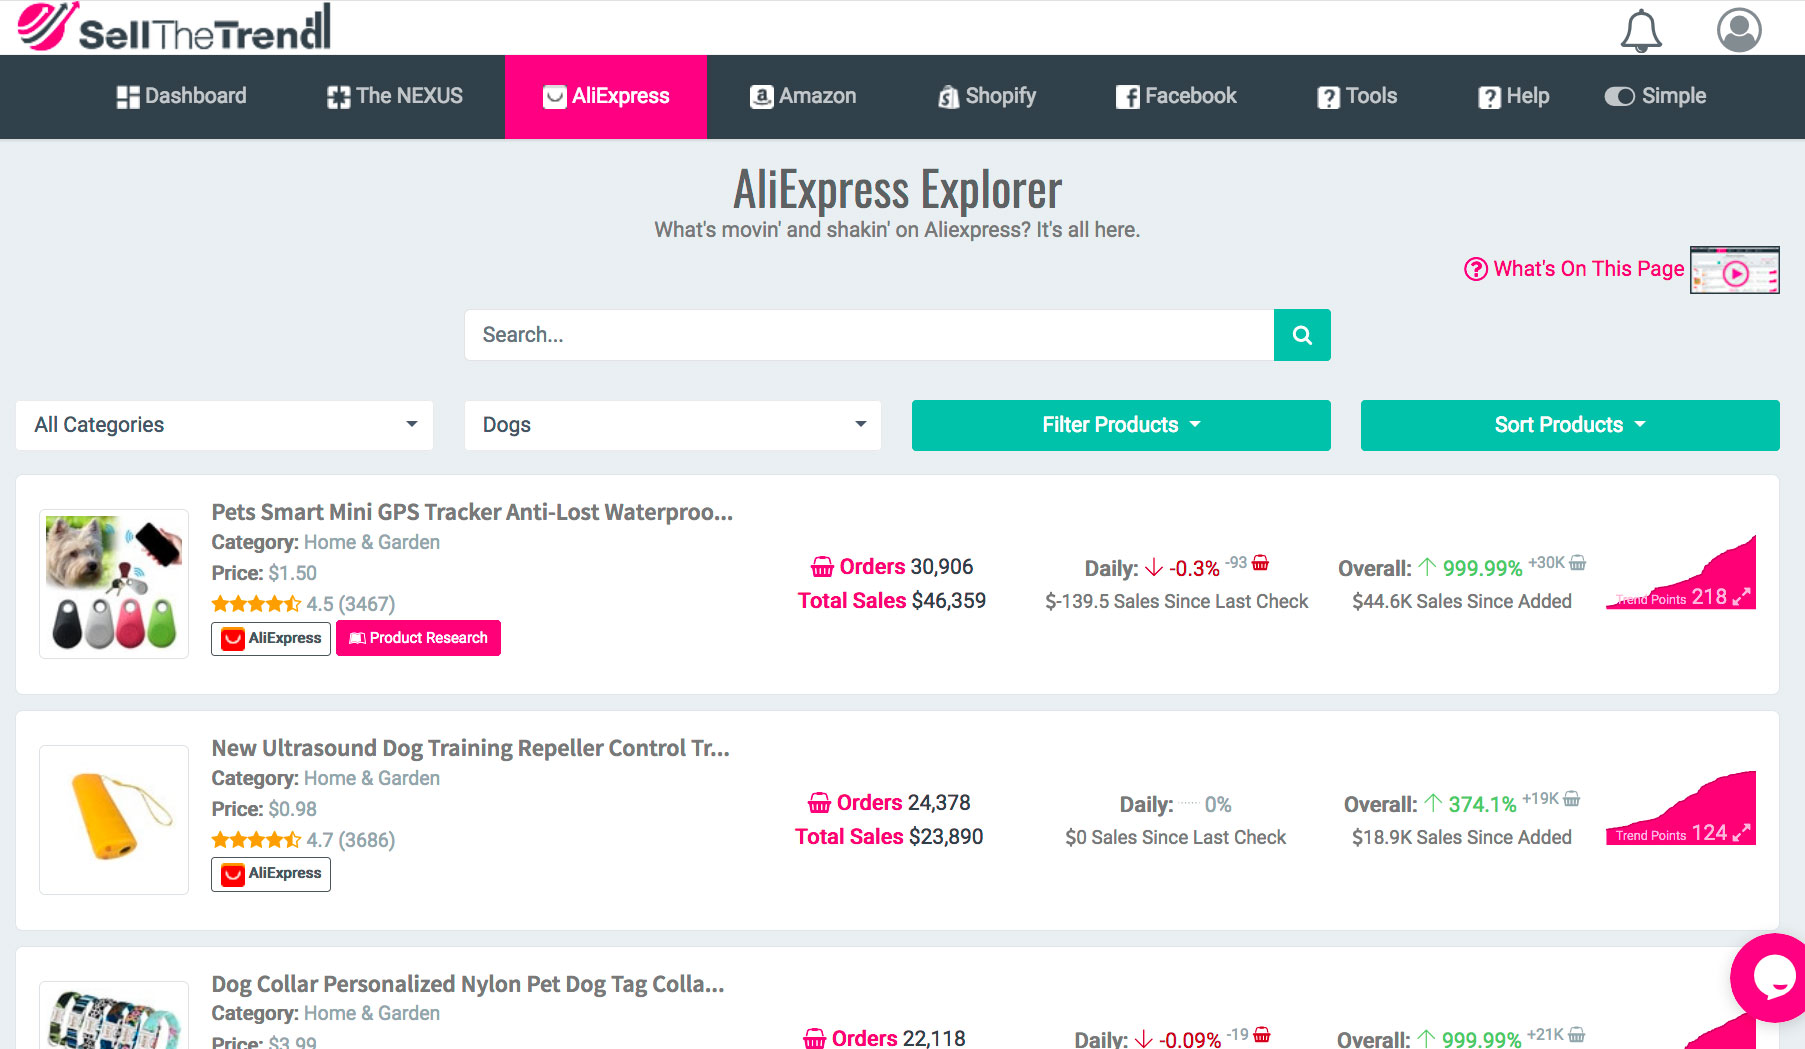 Sell The Trend's Aliexpress product explorer